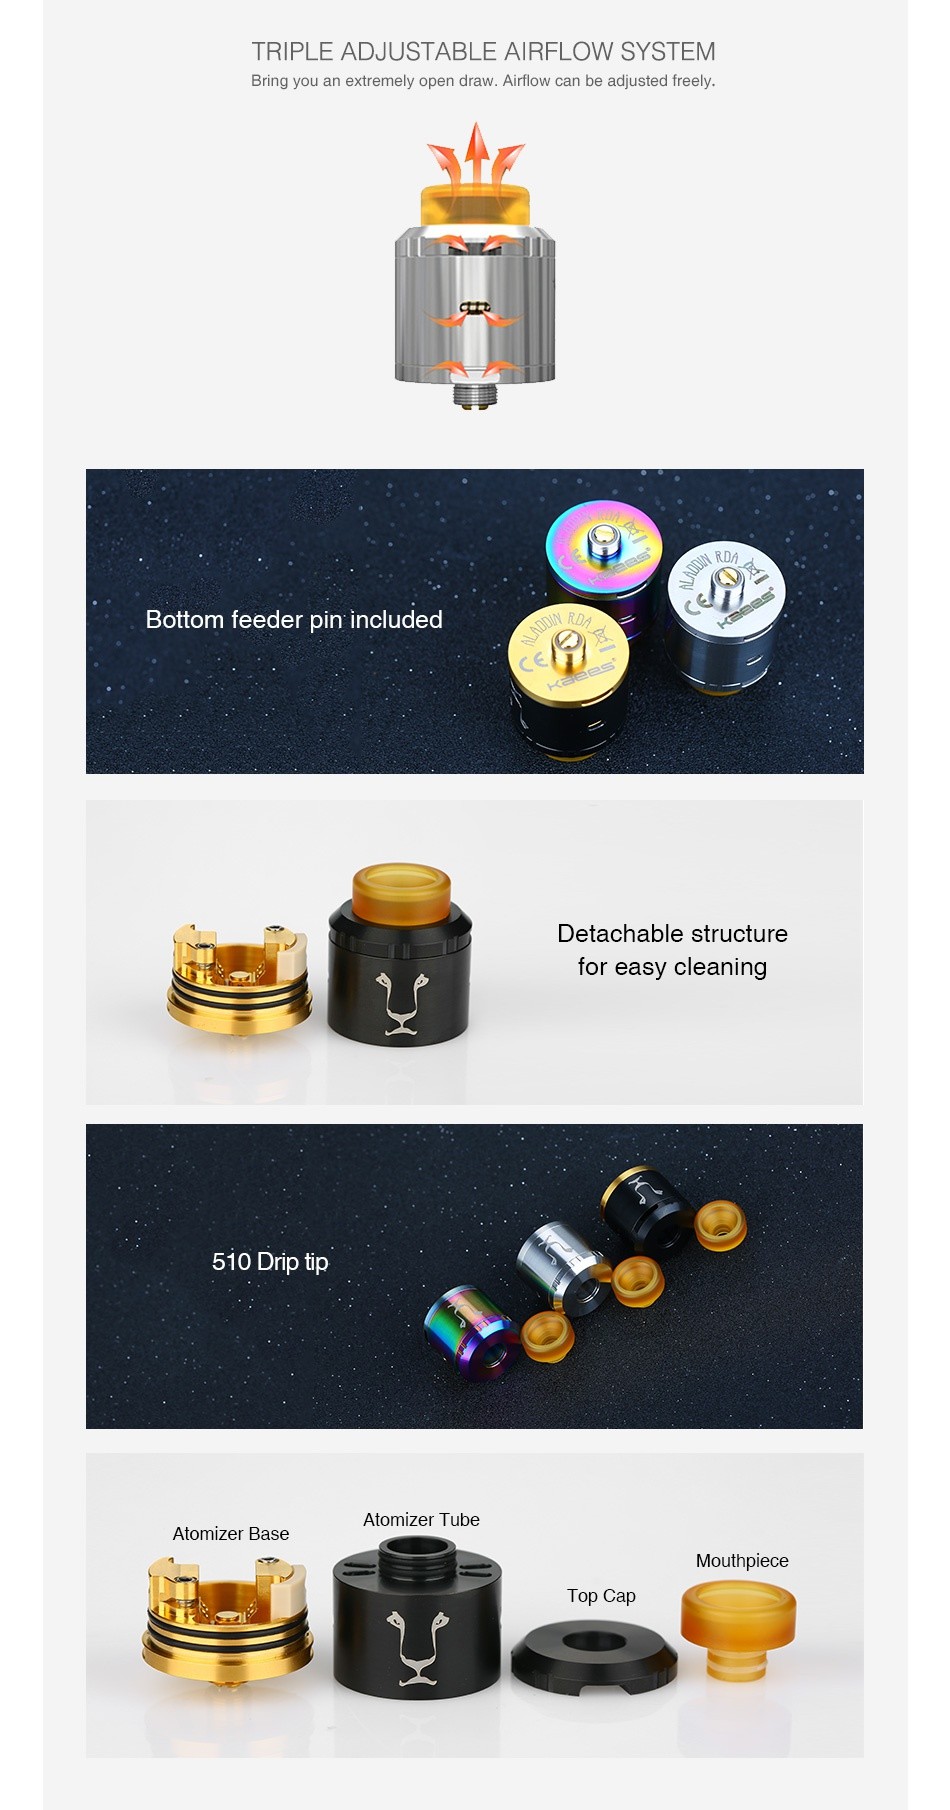 KAEES Aladdin BF RDA TRIPLE ADJUSTABLE AIRFLOW SYSTEM Bring you an extremely open draw  Airflow can be adjusted freely Bottom feeder pin included Detachable structure for easy cleaning 510 Drip tip Atomizer tube Atom B Mouthpiece Top Cap